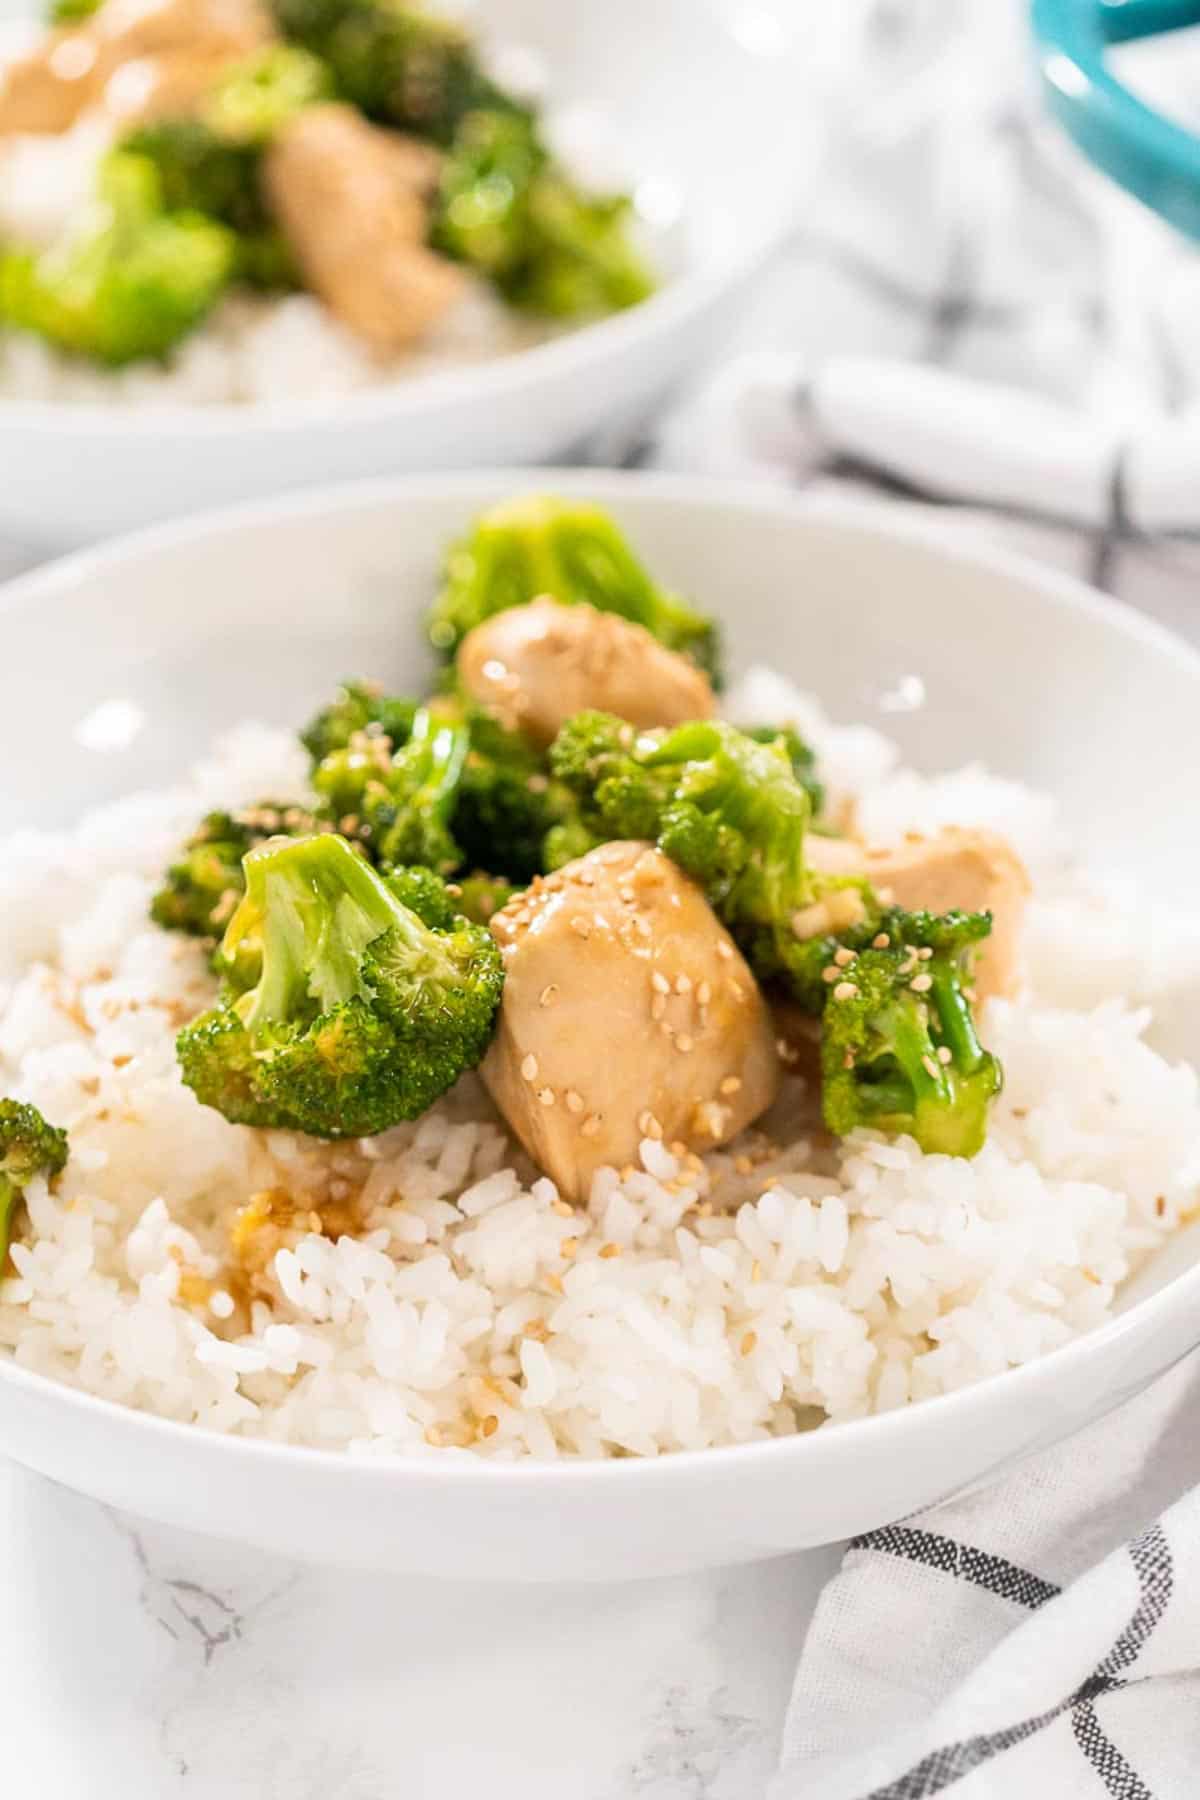 A bowl of white rice and Easy Broccoli Chicken Stir Fry in a white bowl sitting on a white and grey kitchen towel.